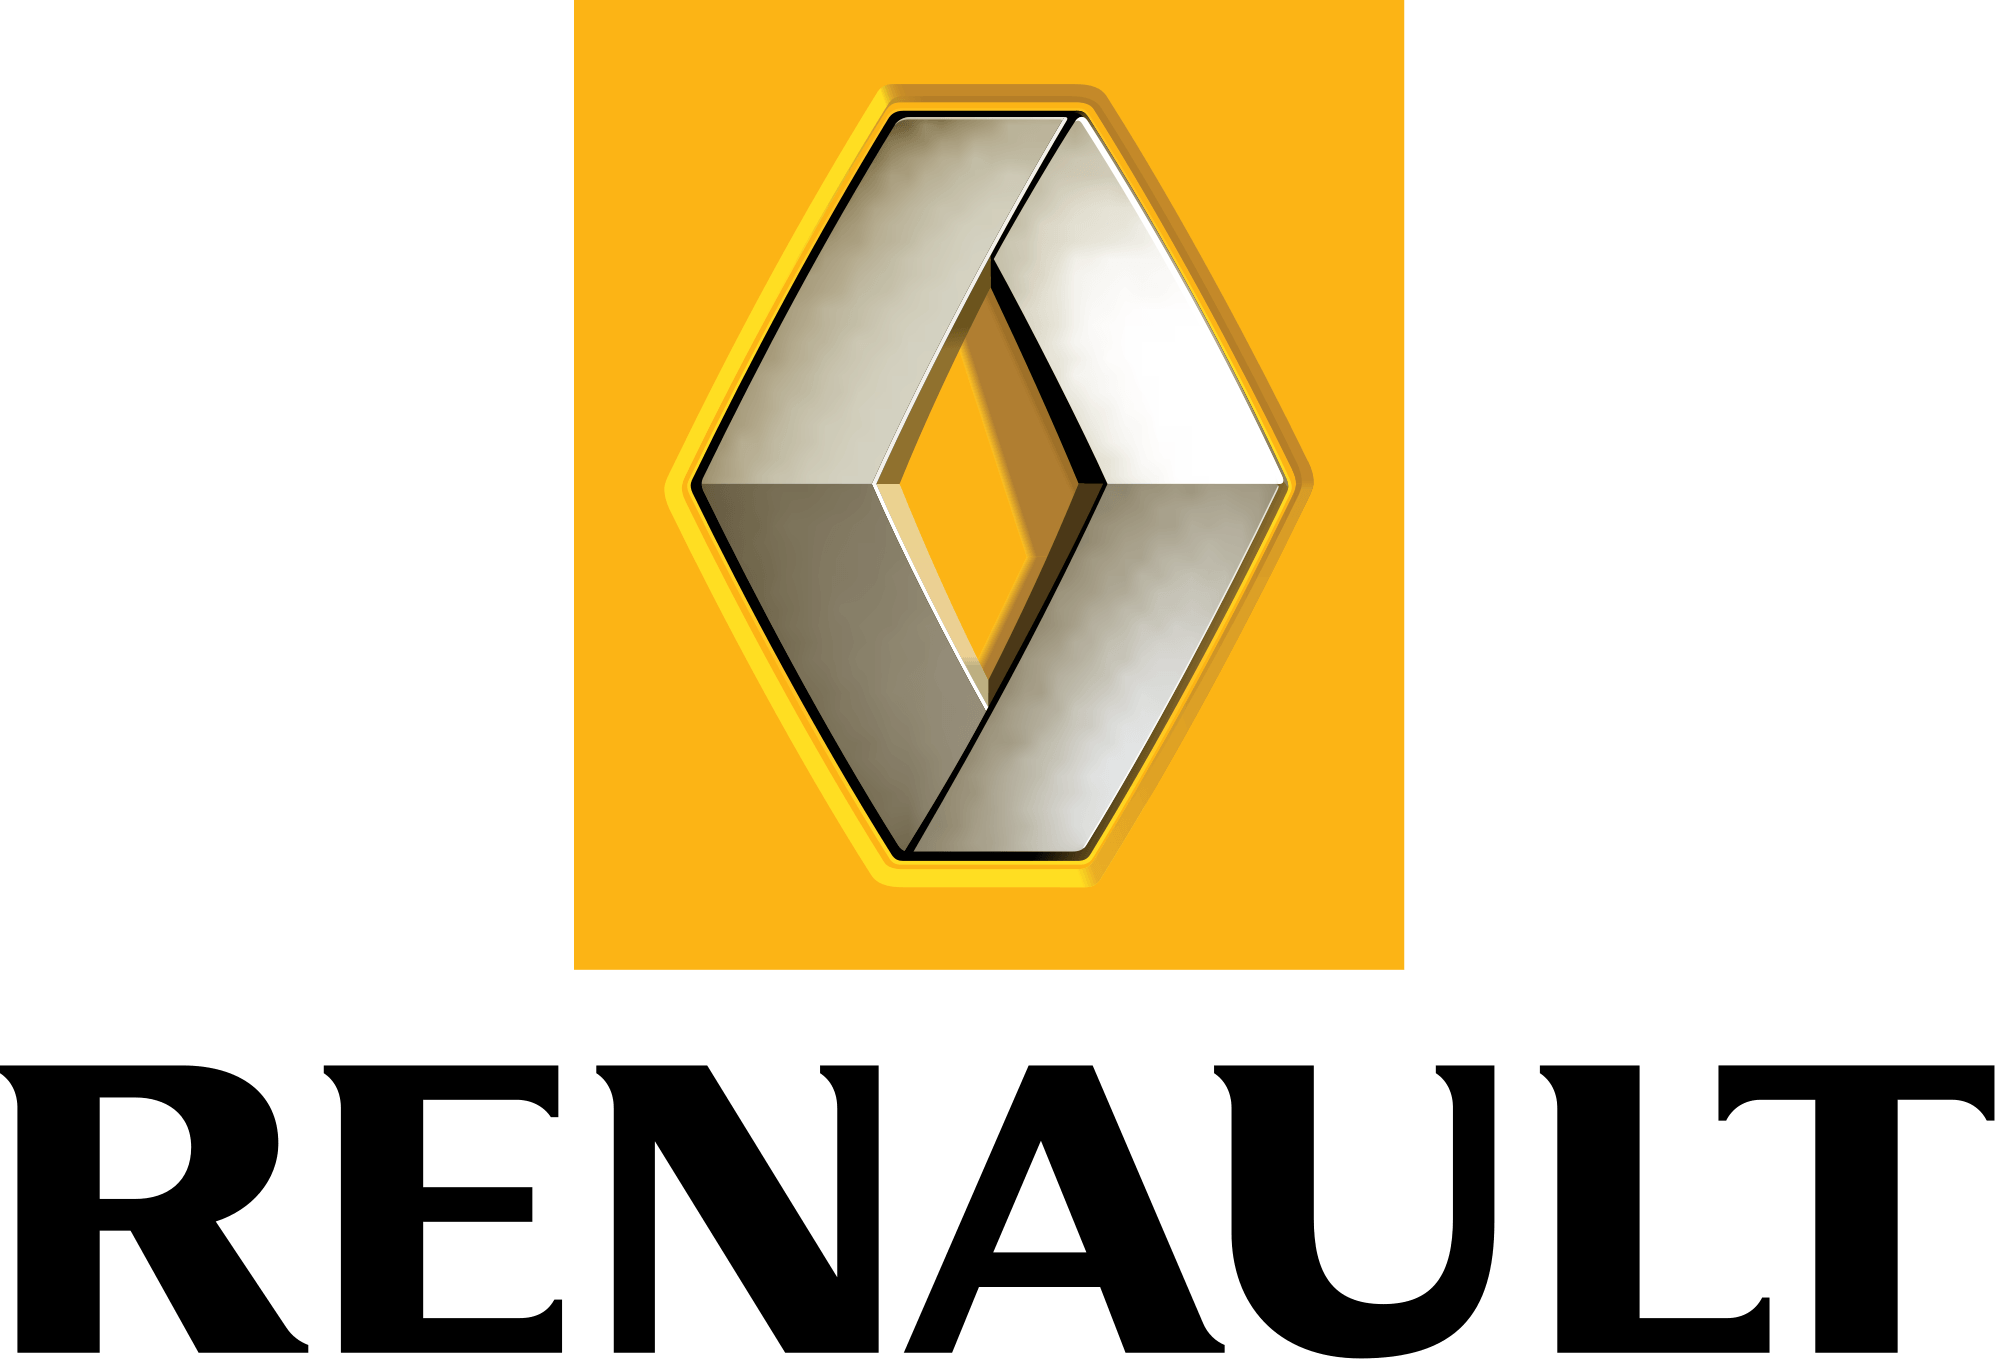 Silver Diamond Logo - Renault Logo, Renault Car Symbol Meaning and History. Car Brand